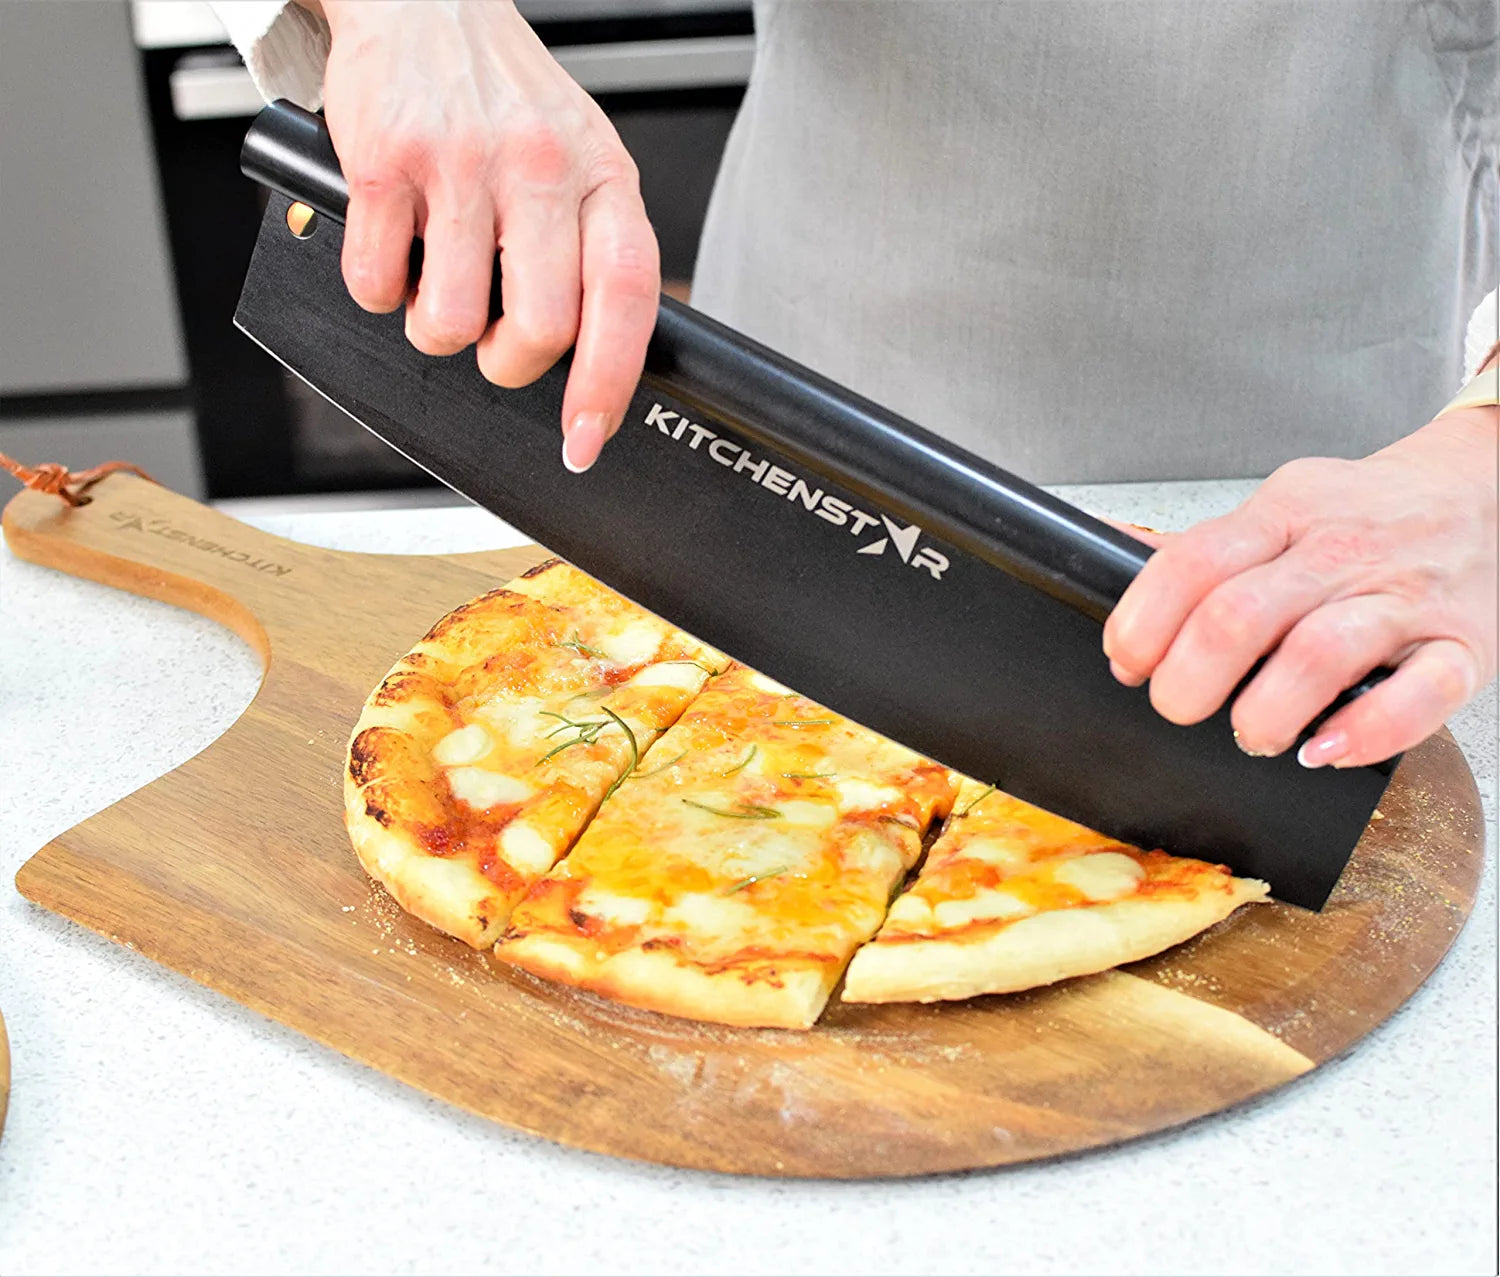 KitchenStar Pizza Cutter Rocker 12 inch - Stainless Steel Pizza Slicer Knife - Black NonStick Sharp Knife with Blade Cover - Pizza Making Tools & Oven Accessories - Dishwasher Safe